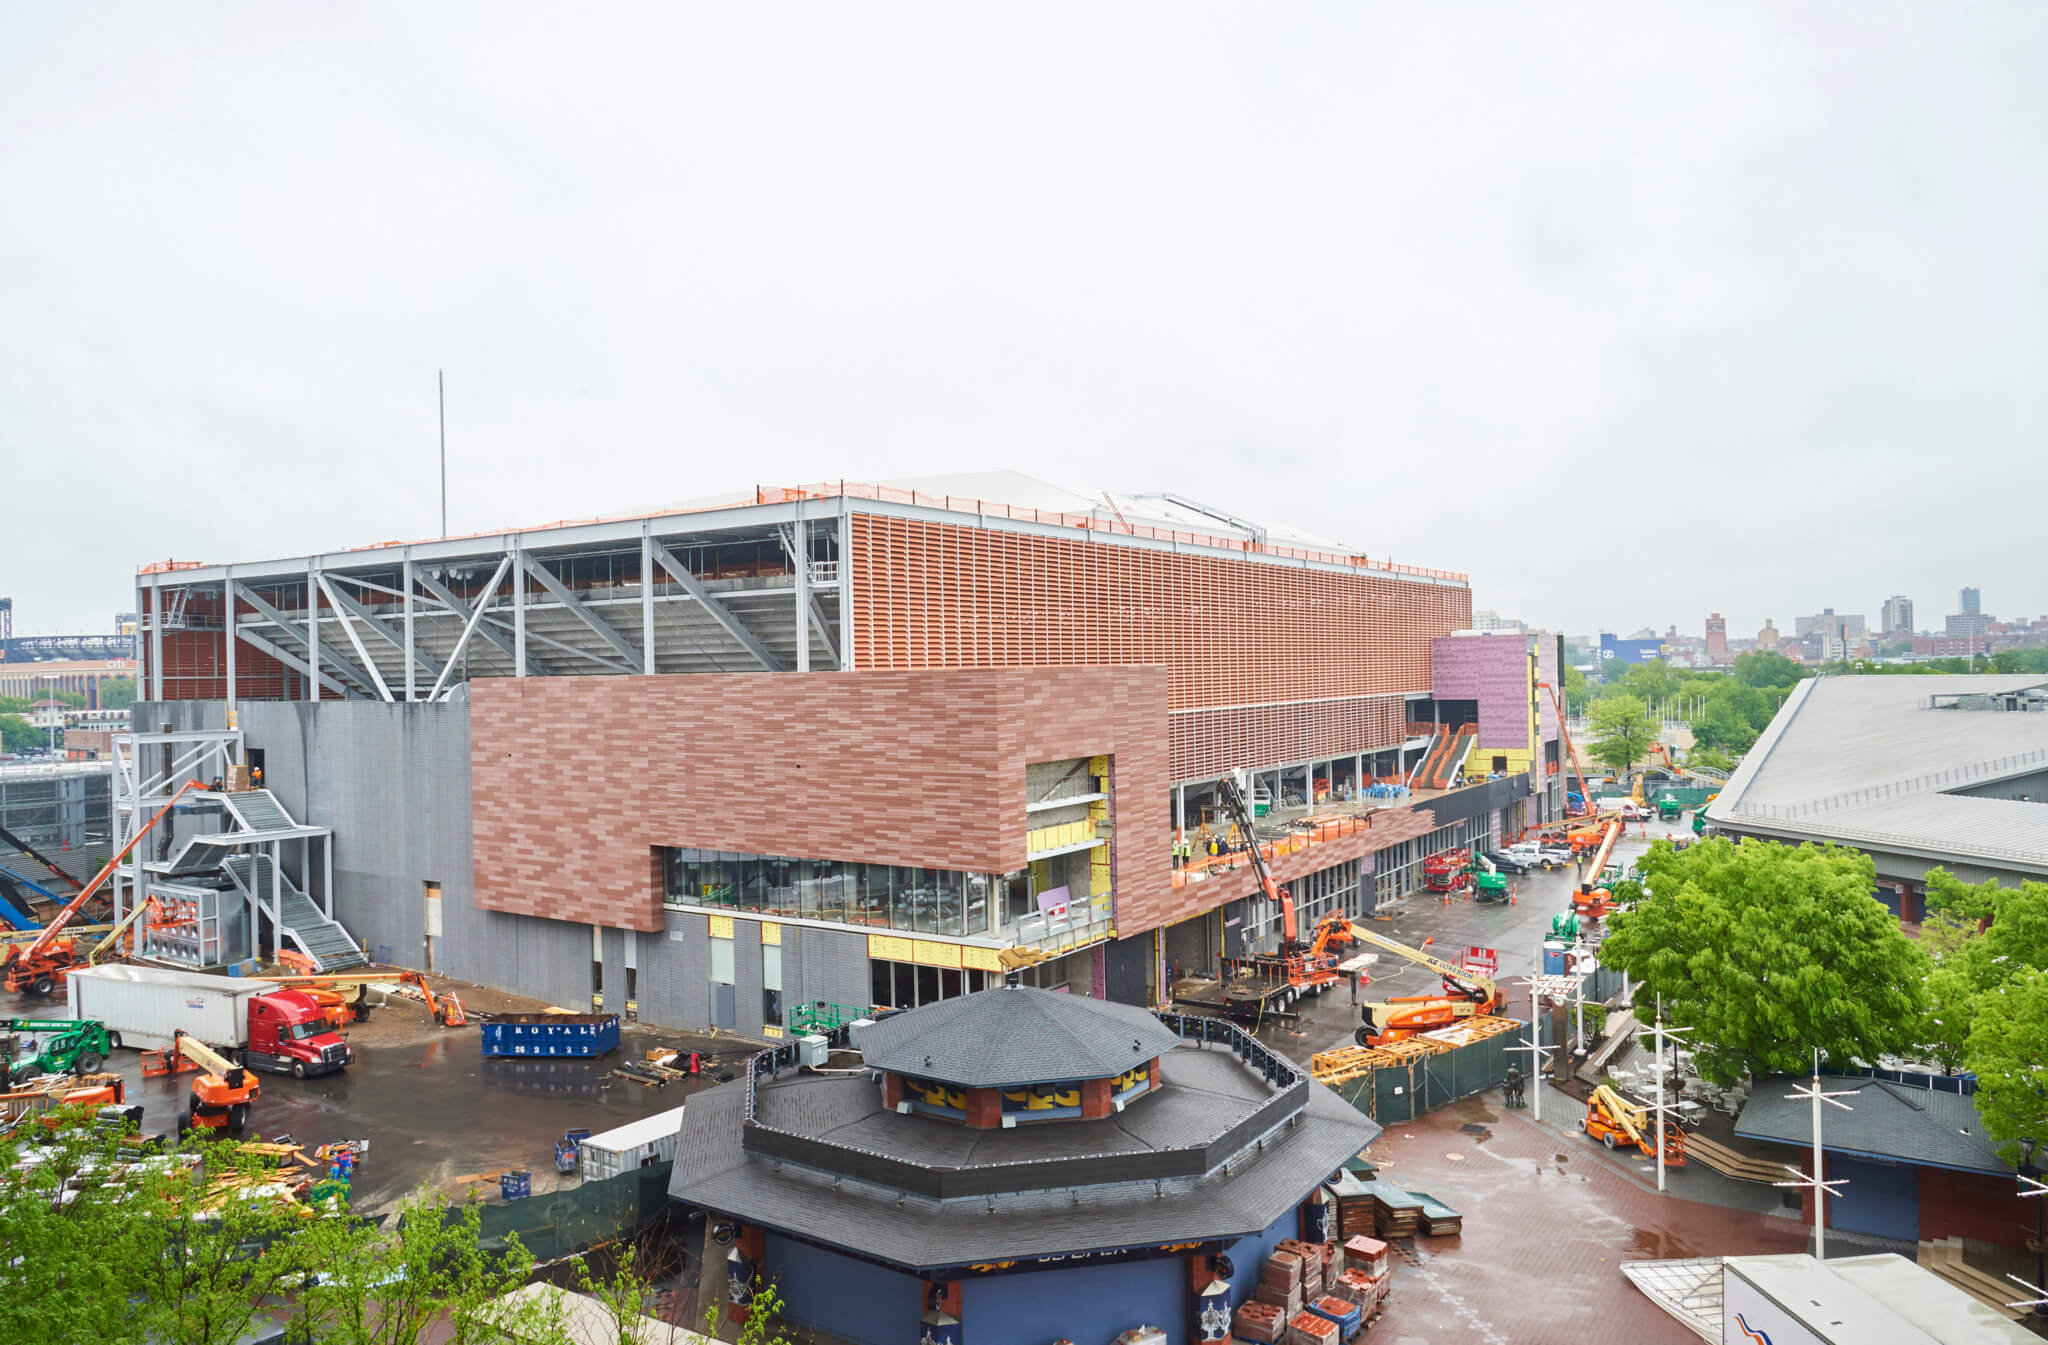 Take a look inside the new Louis Armstrong Stadium being built at tennis center in Flushing ...